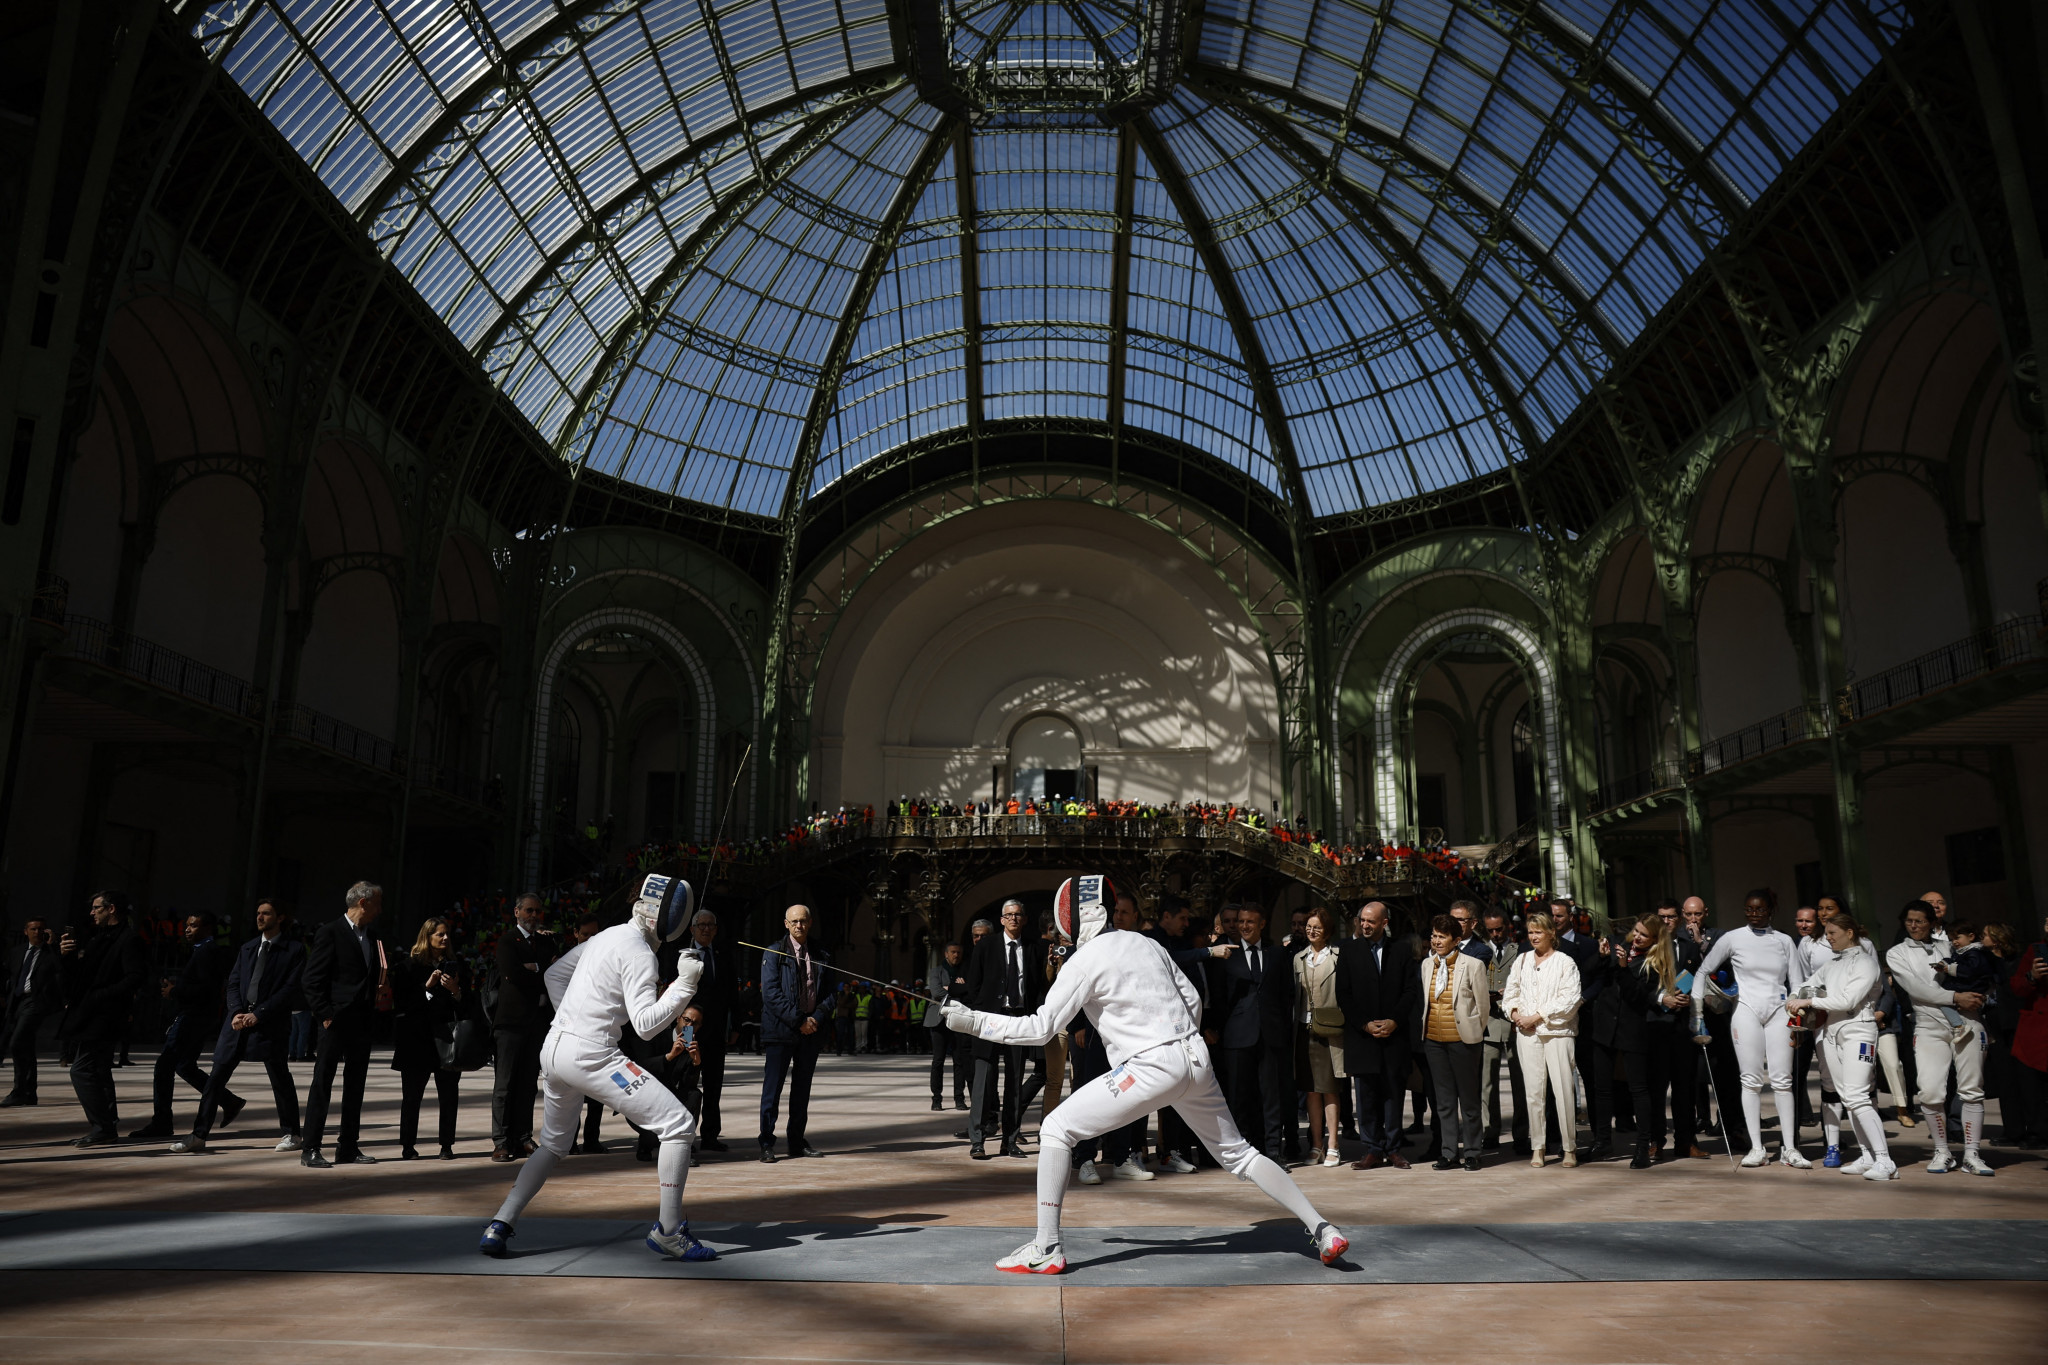 Grand Palais is the home of fencing and taekwando during the upcoming Games in the French capital. GETTY IMAGES